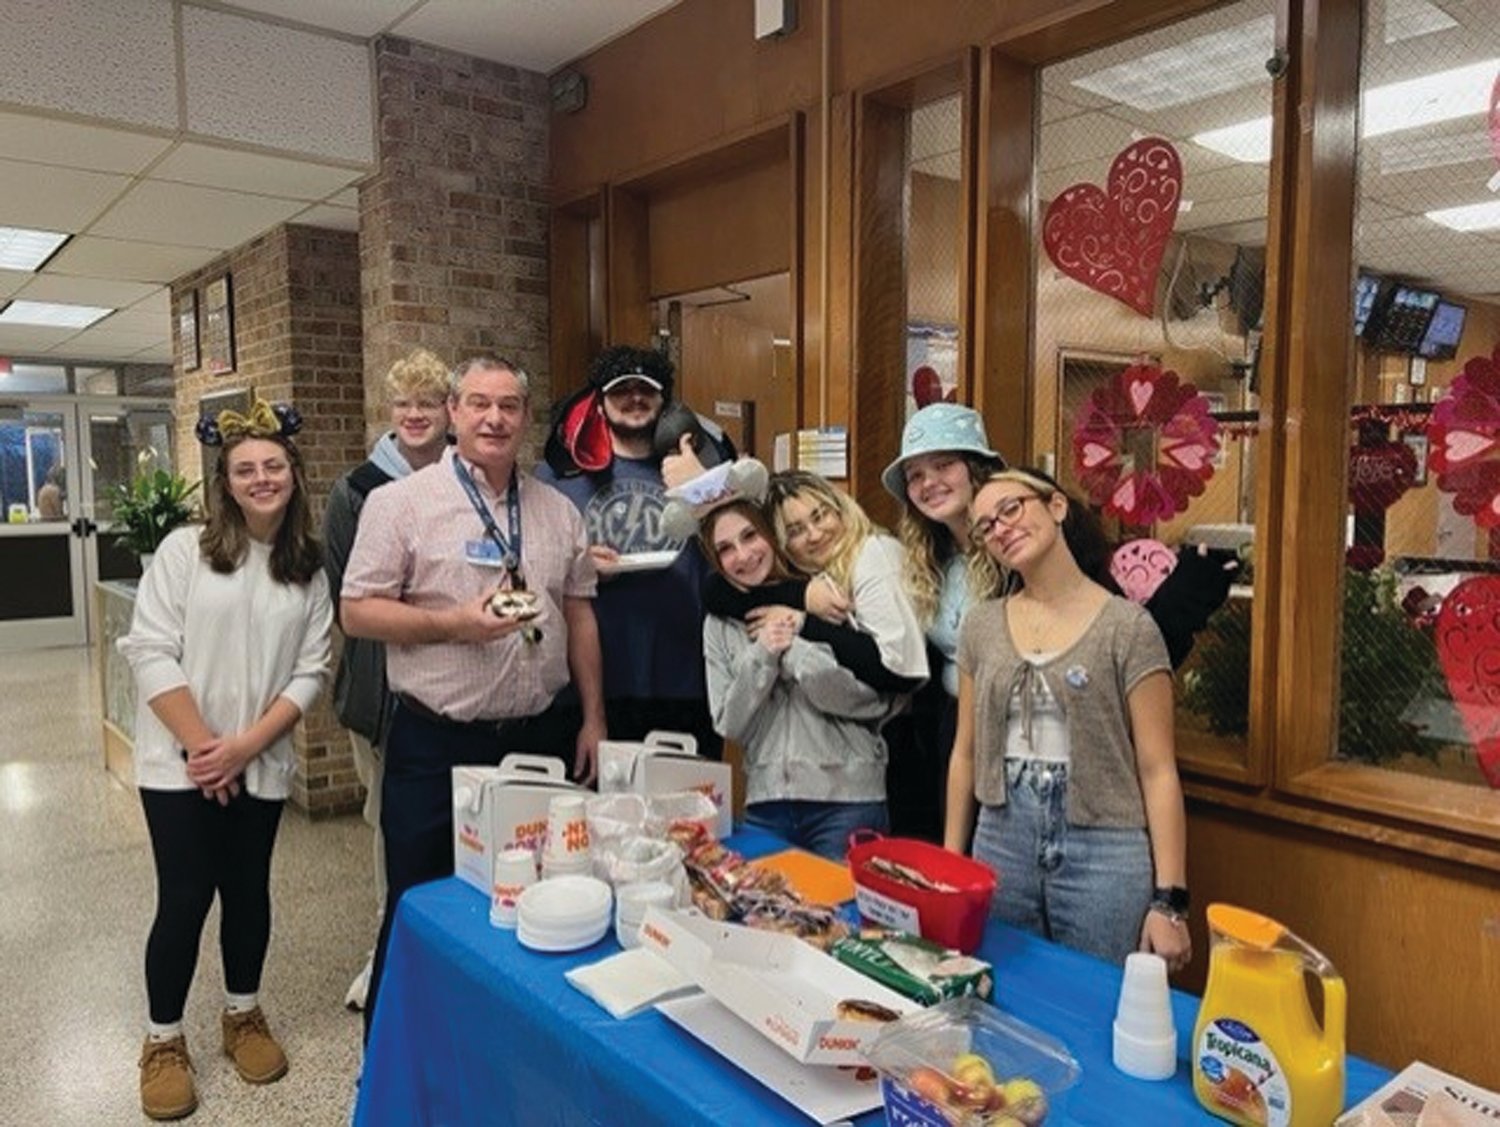 MAD HATTERS: From left to right, Lauren Dixon, Jackson Troxell, Ronald Lamoureux, Benjamin Monahan, Katelyn Loffler, Detinee Costa, Trinity Blondin and Eliyanha Negron pose for a photo on Crazy Hat Day.